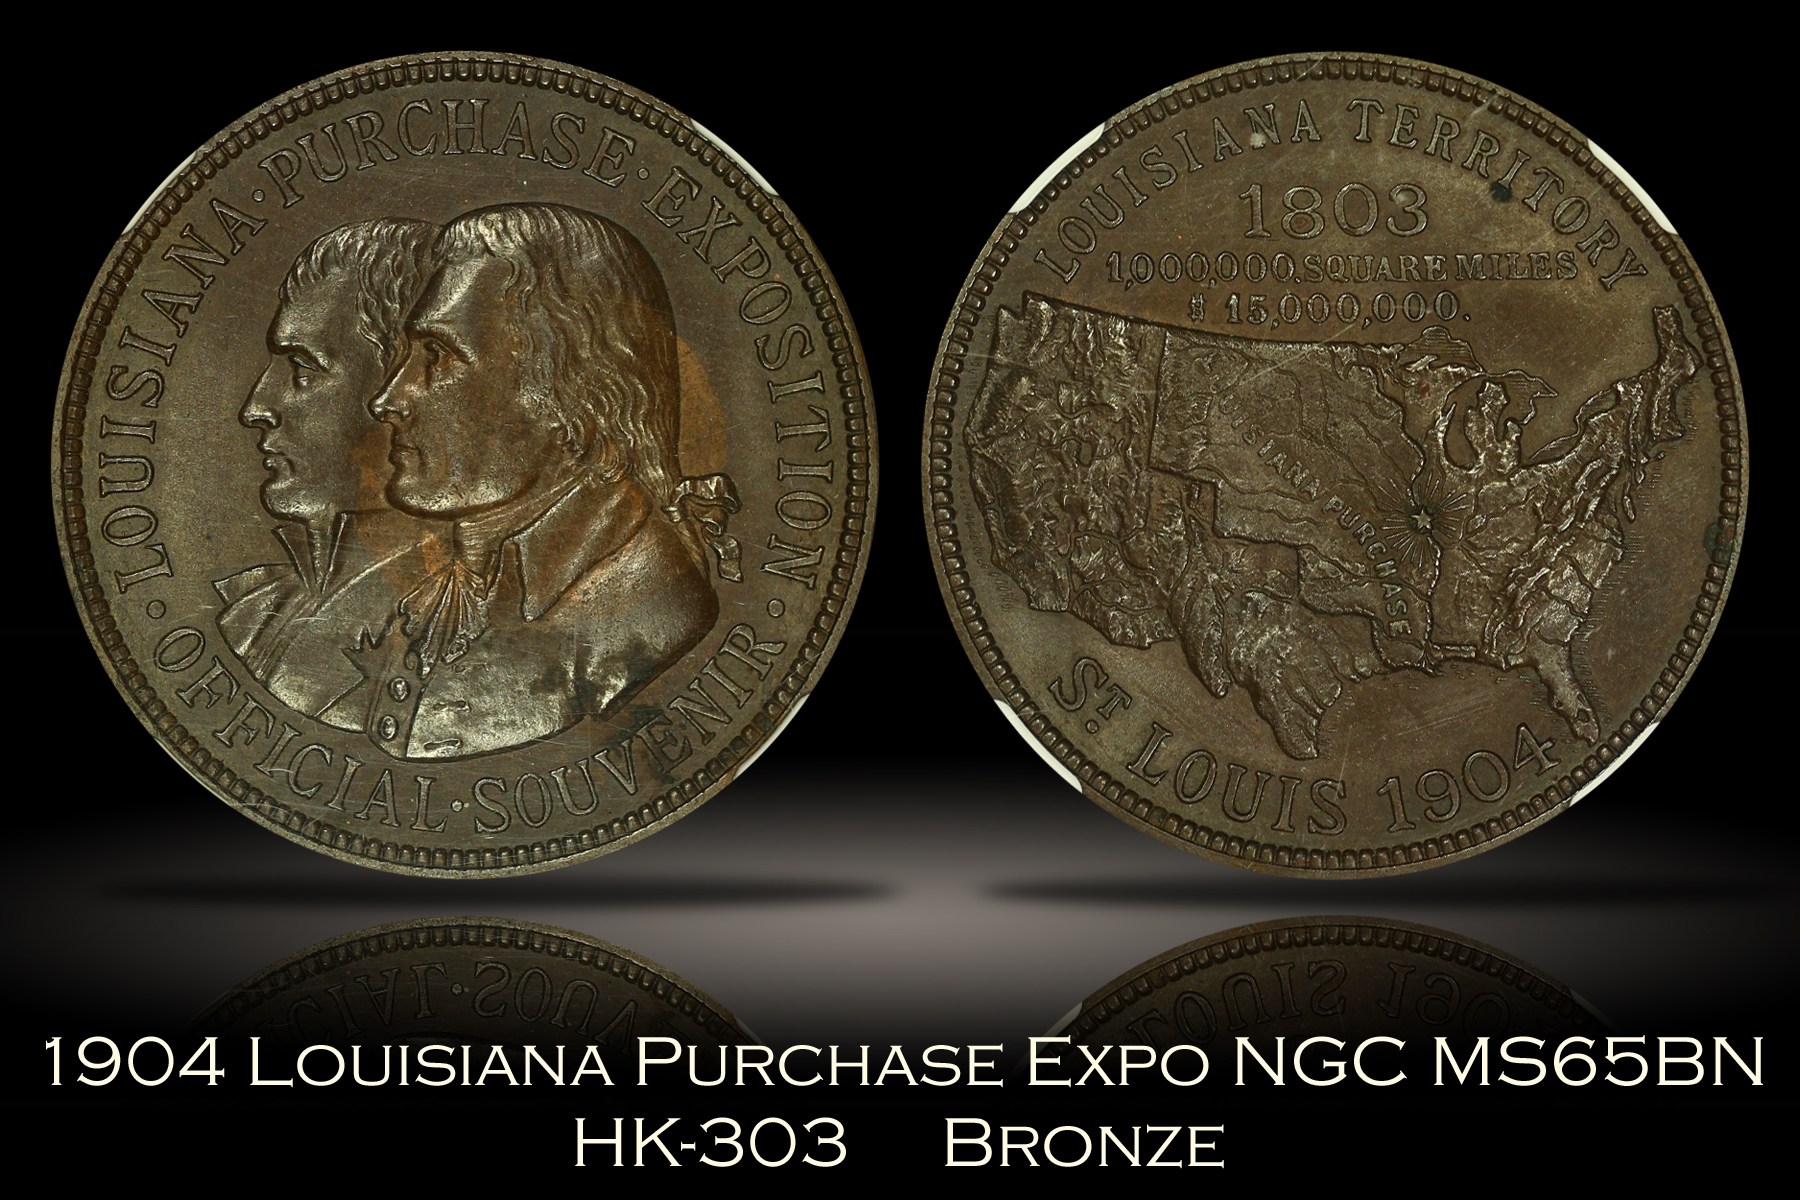 1904 Louisiana Purchase Expo Official Medal HK-303 NGC MS65BN